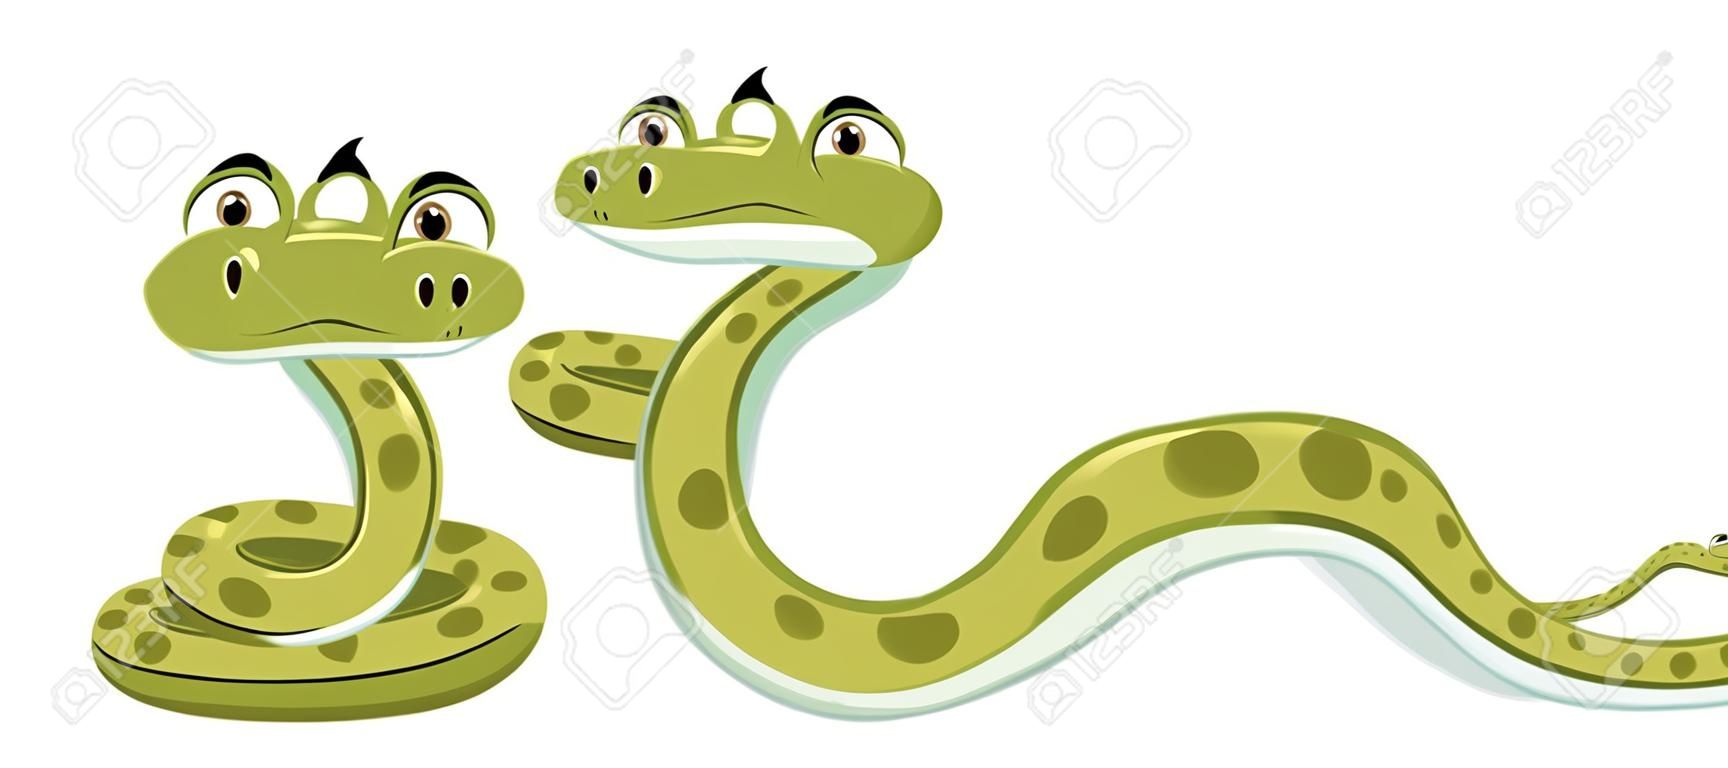 Snake with different position illustration